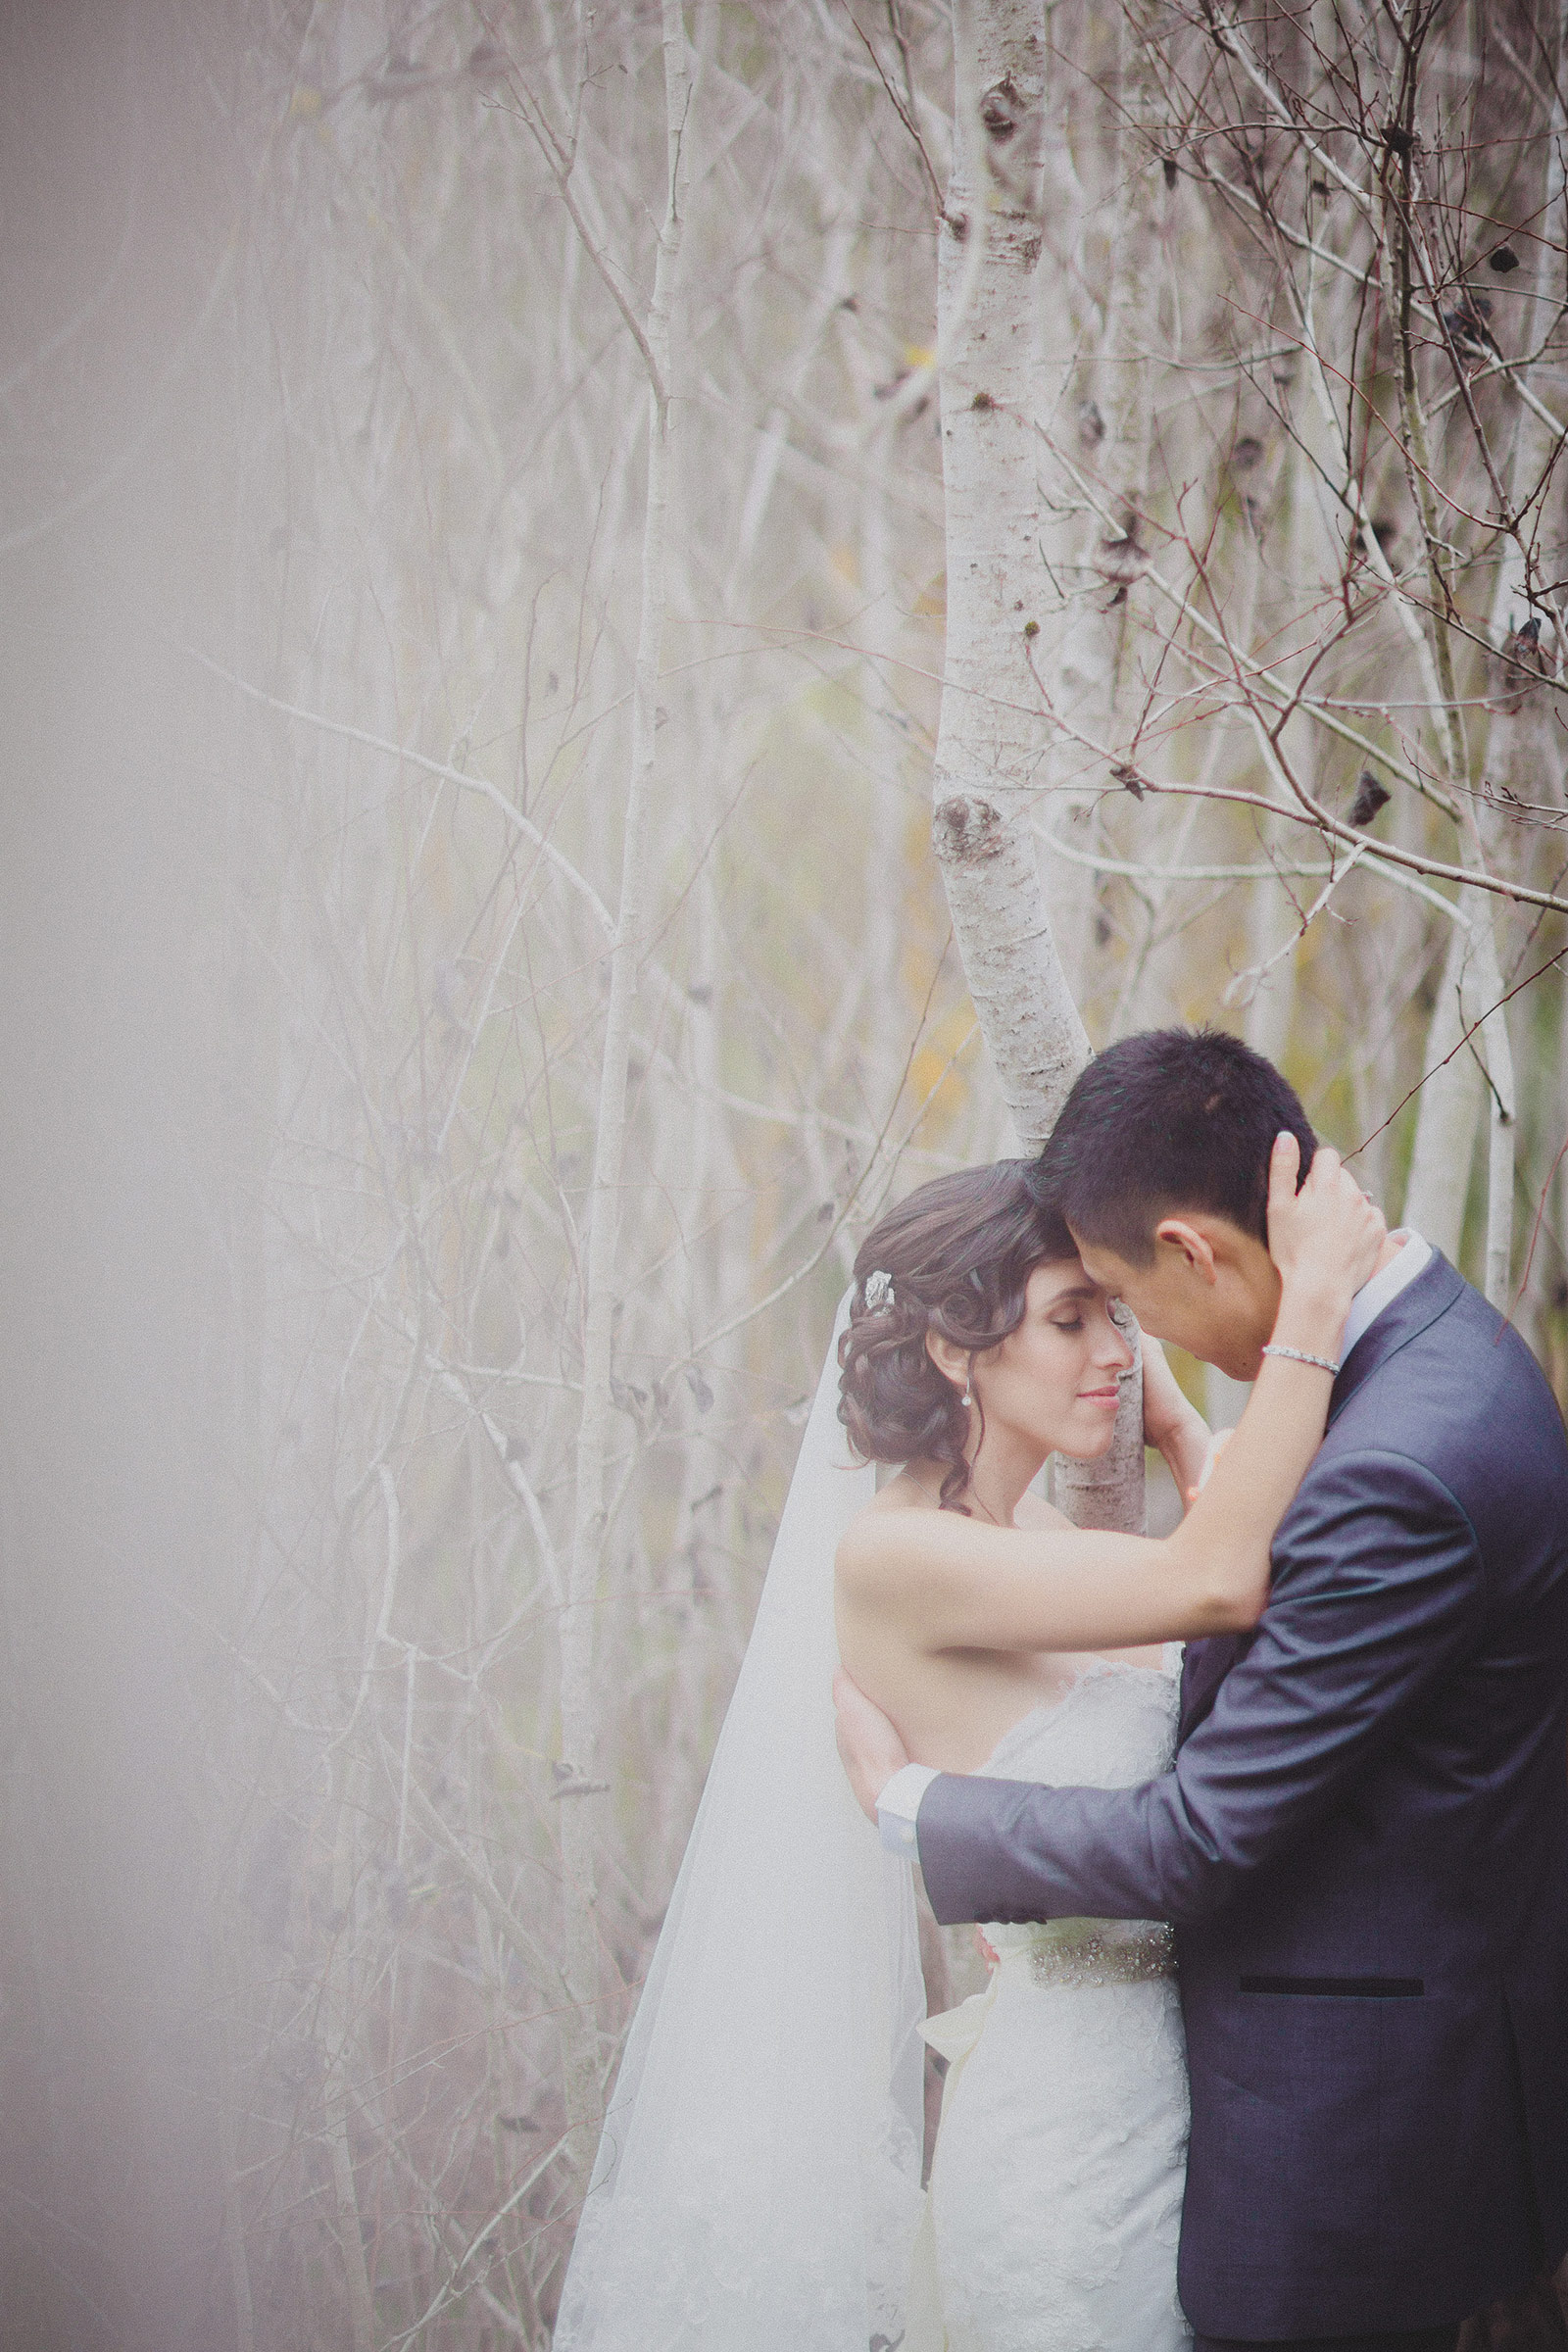 A bride and groom embracing in front of trees.